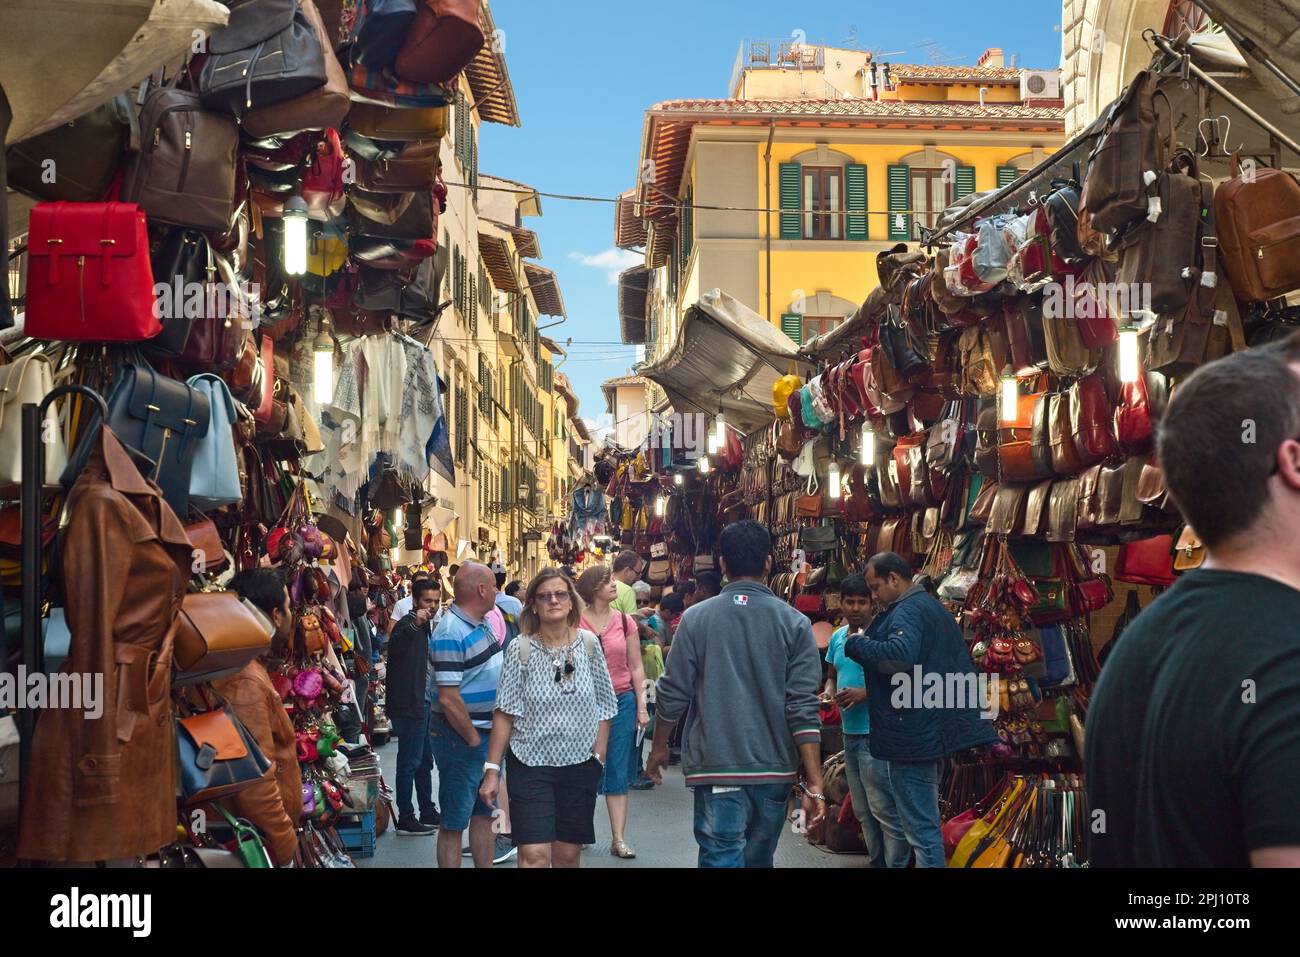 Crowds browse among the leather goods vendors on a narrow street outside the Central Market) on a bright sunny day in Florence, Italy, Stock Photo